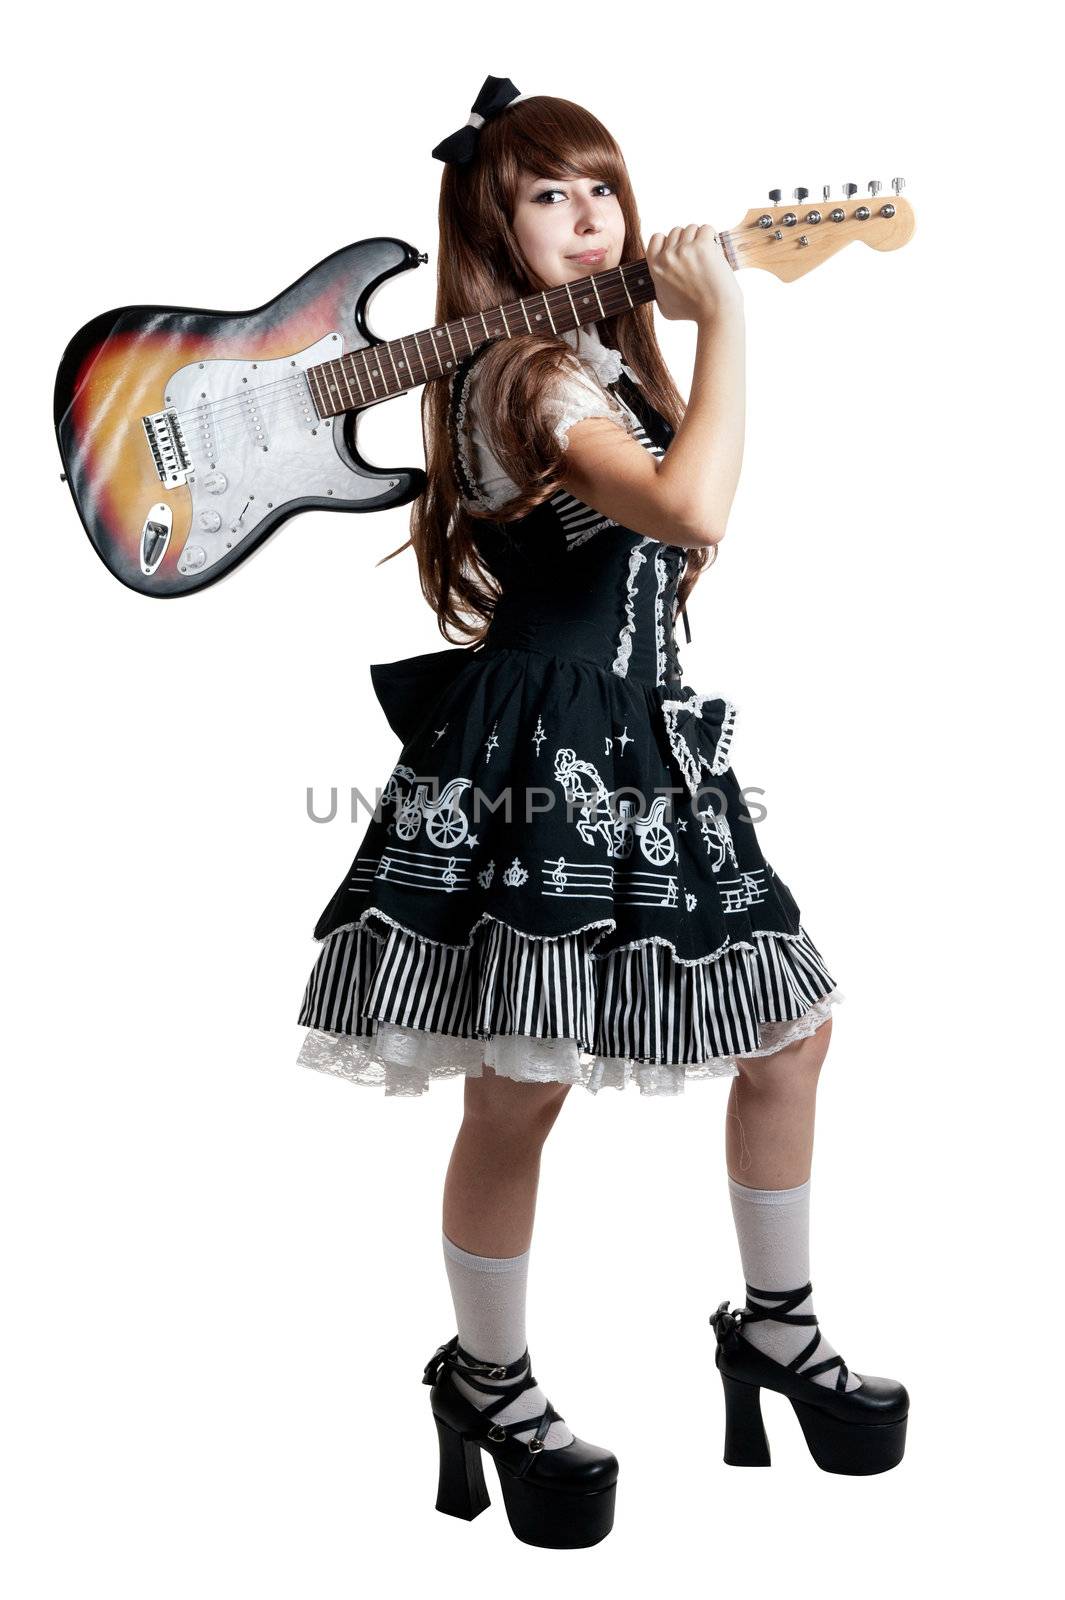 Cosplay girl in black dress with guitar by zybr78